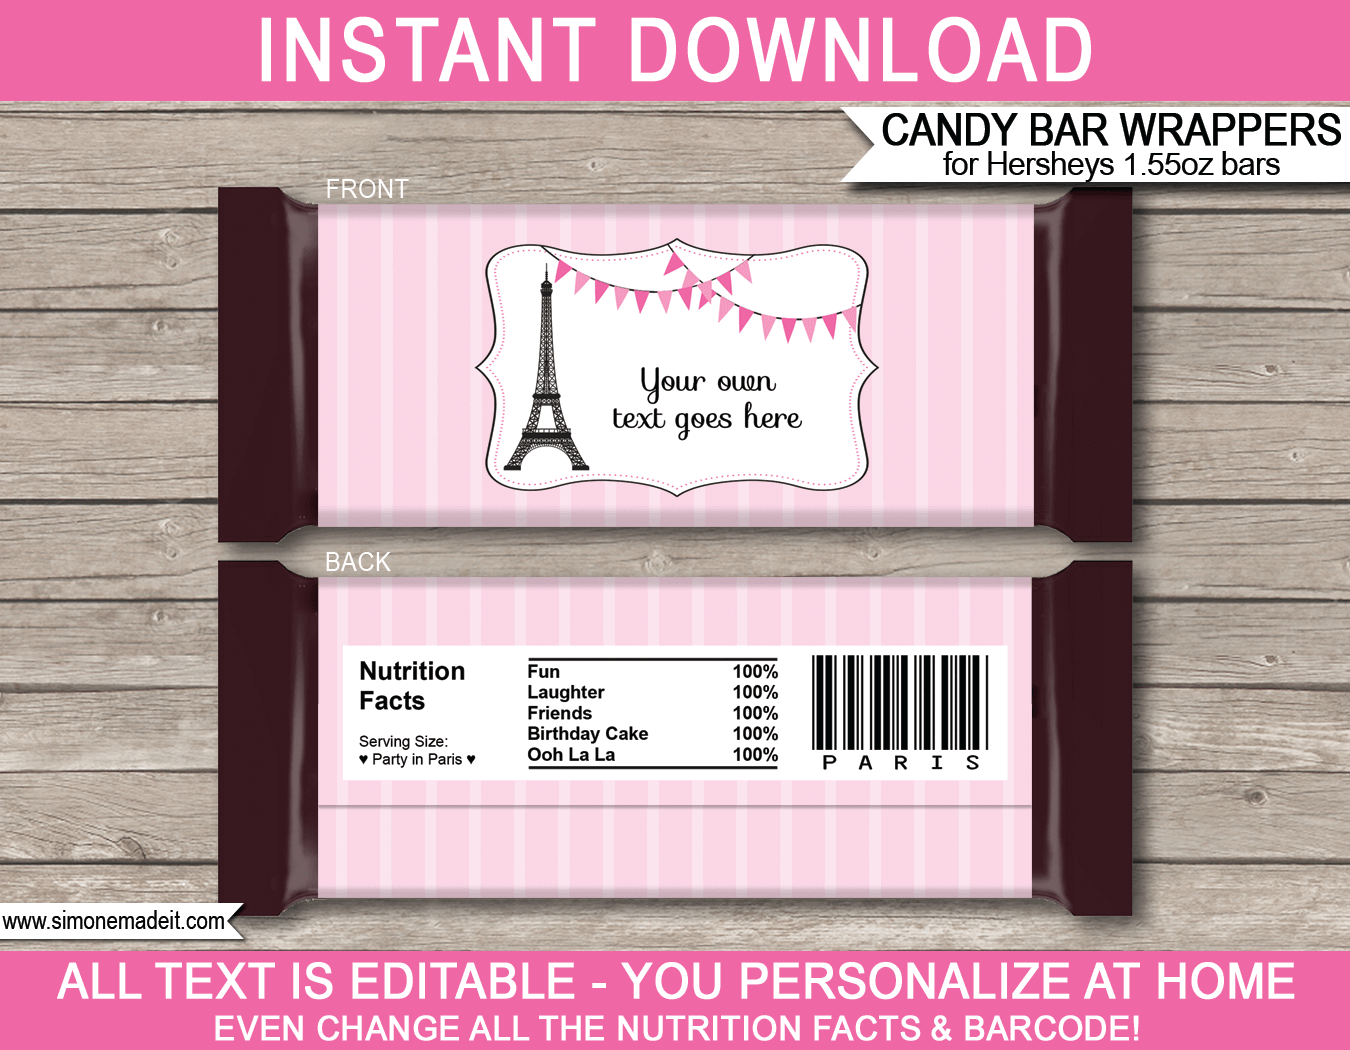 Paris Hershey Candy Bar Wrappers | Birthday Party Favors | Personalized Candy Bars | Editable Template | INSTANT DOWNLOAD $3.00 via simonemadeit.com